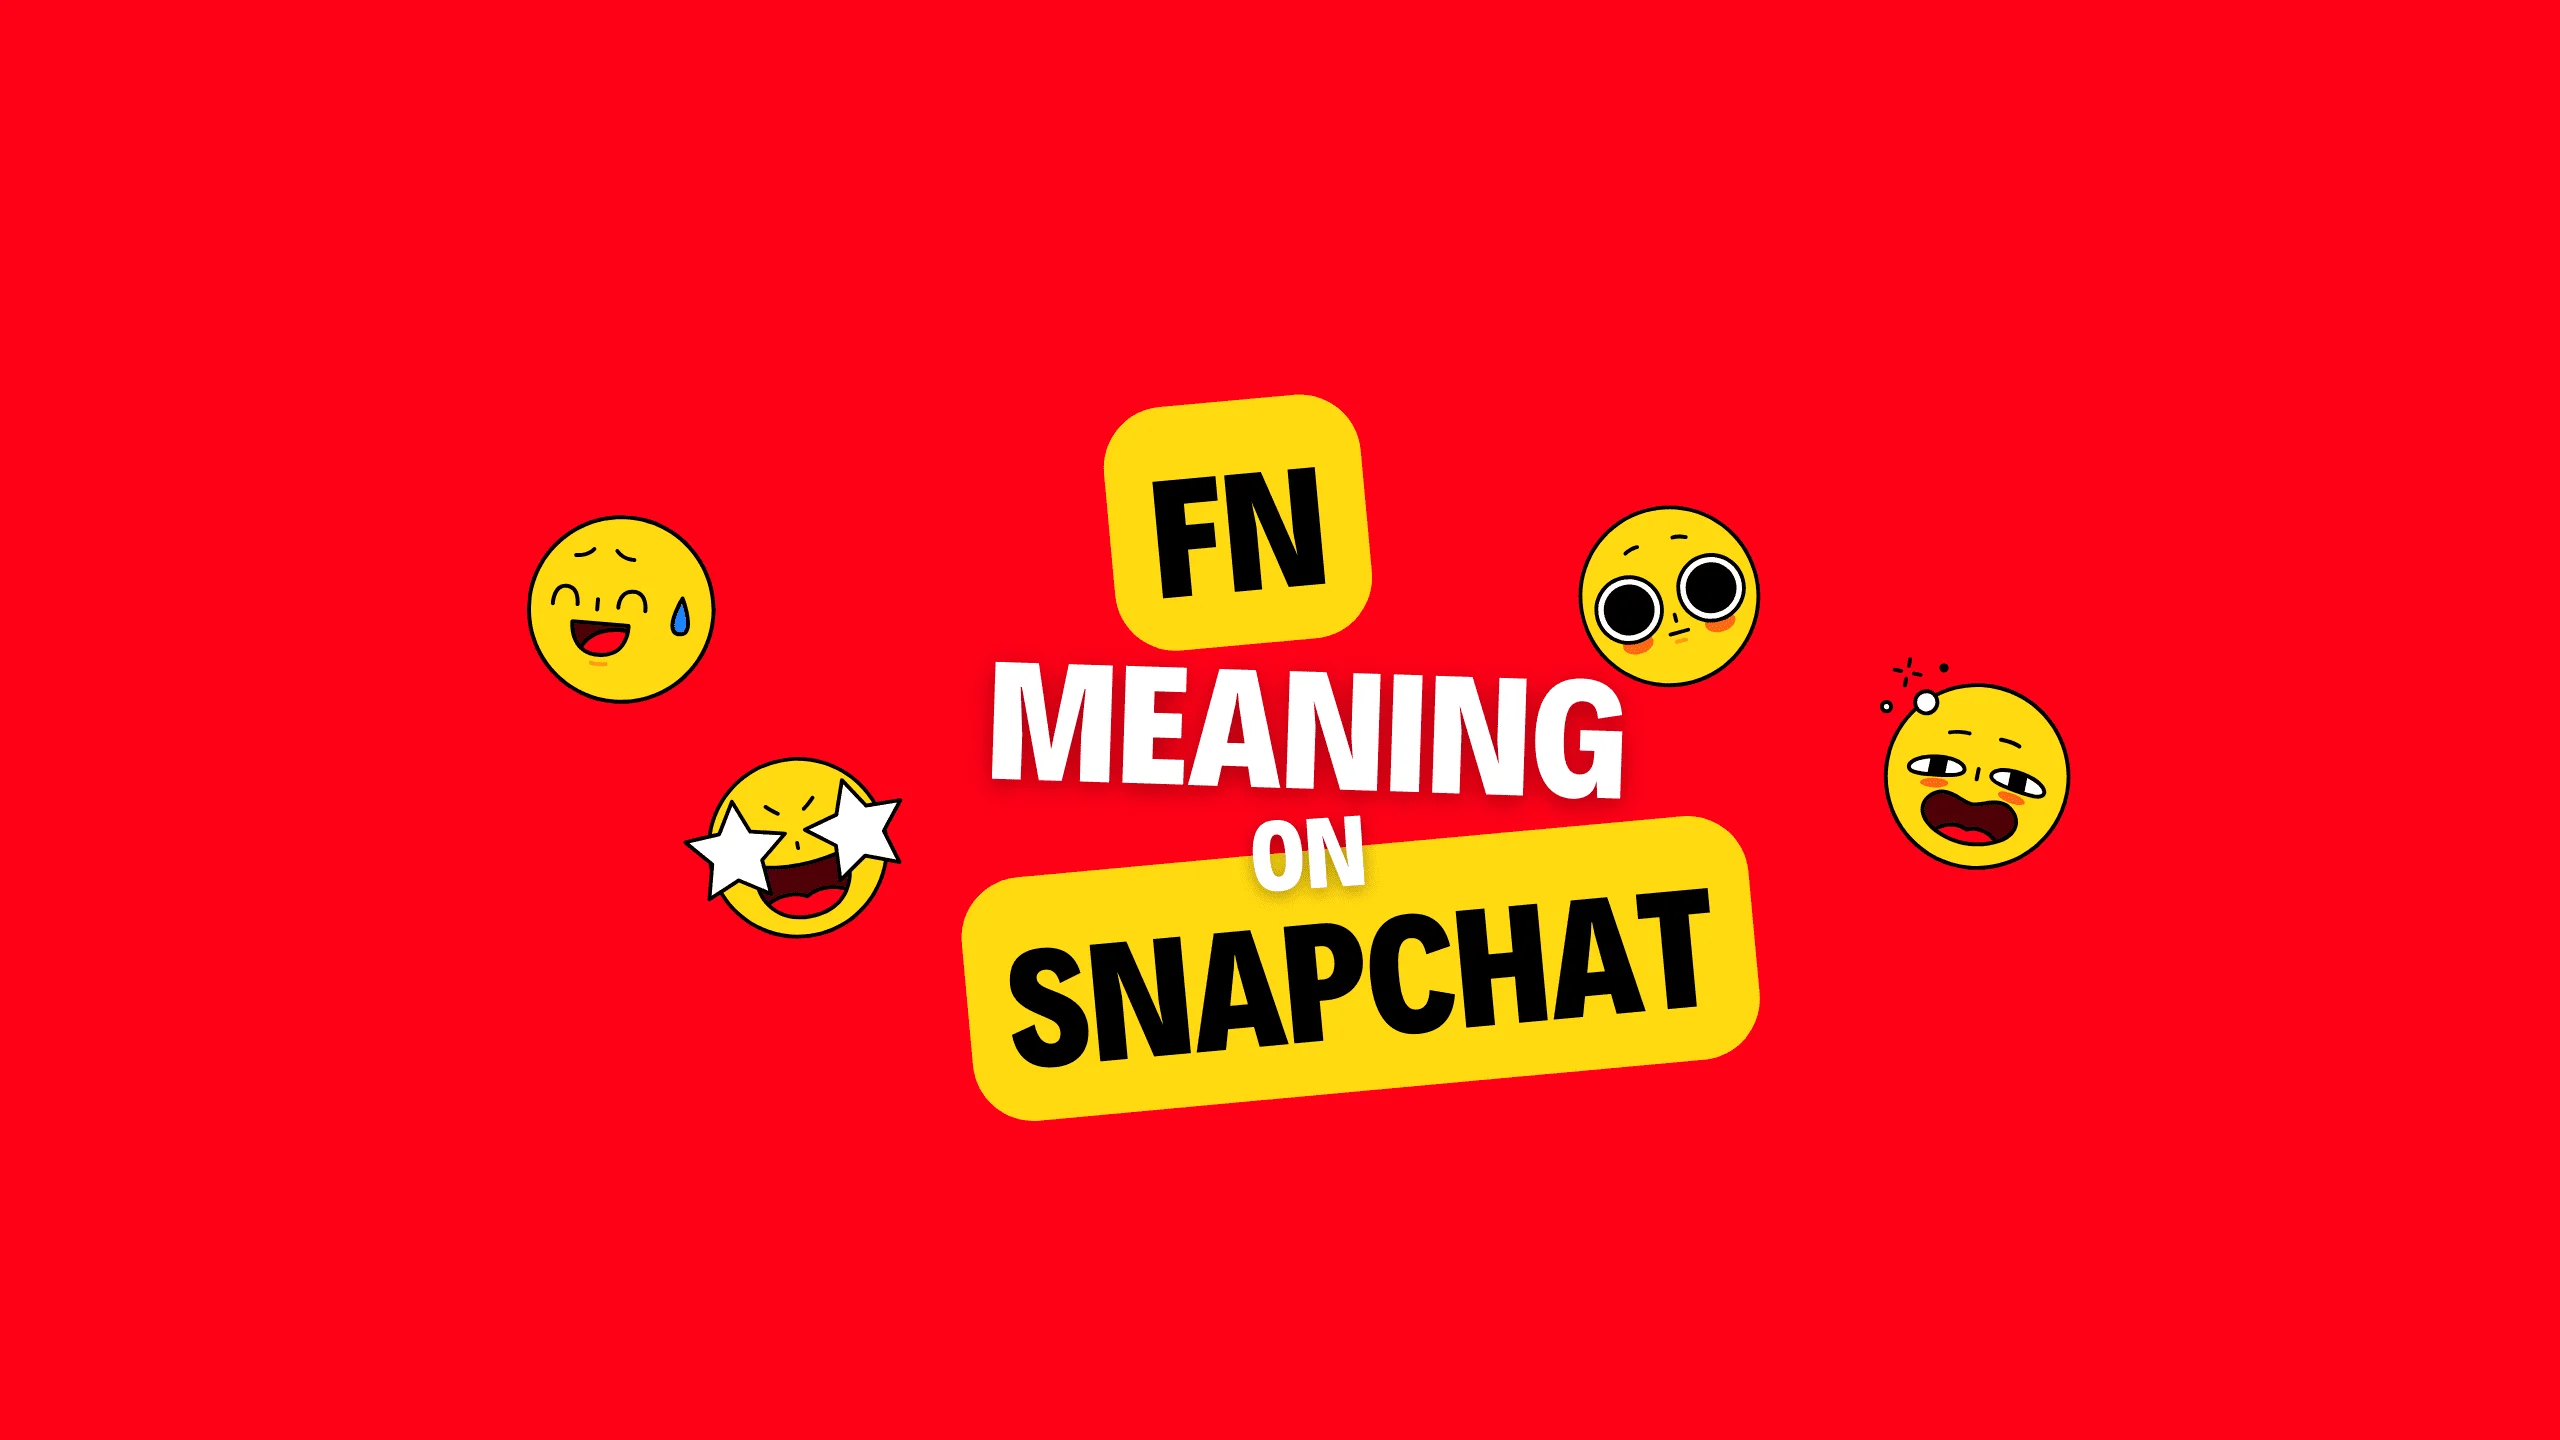 What does FN mean on Snapchat